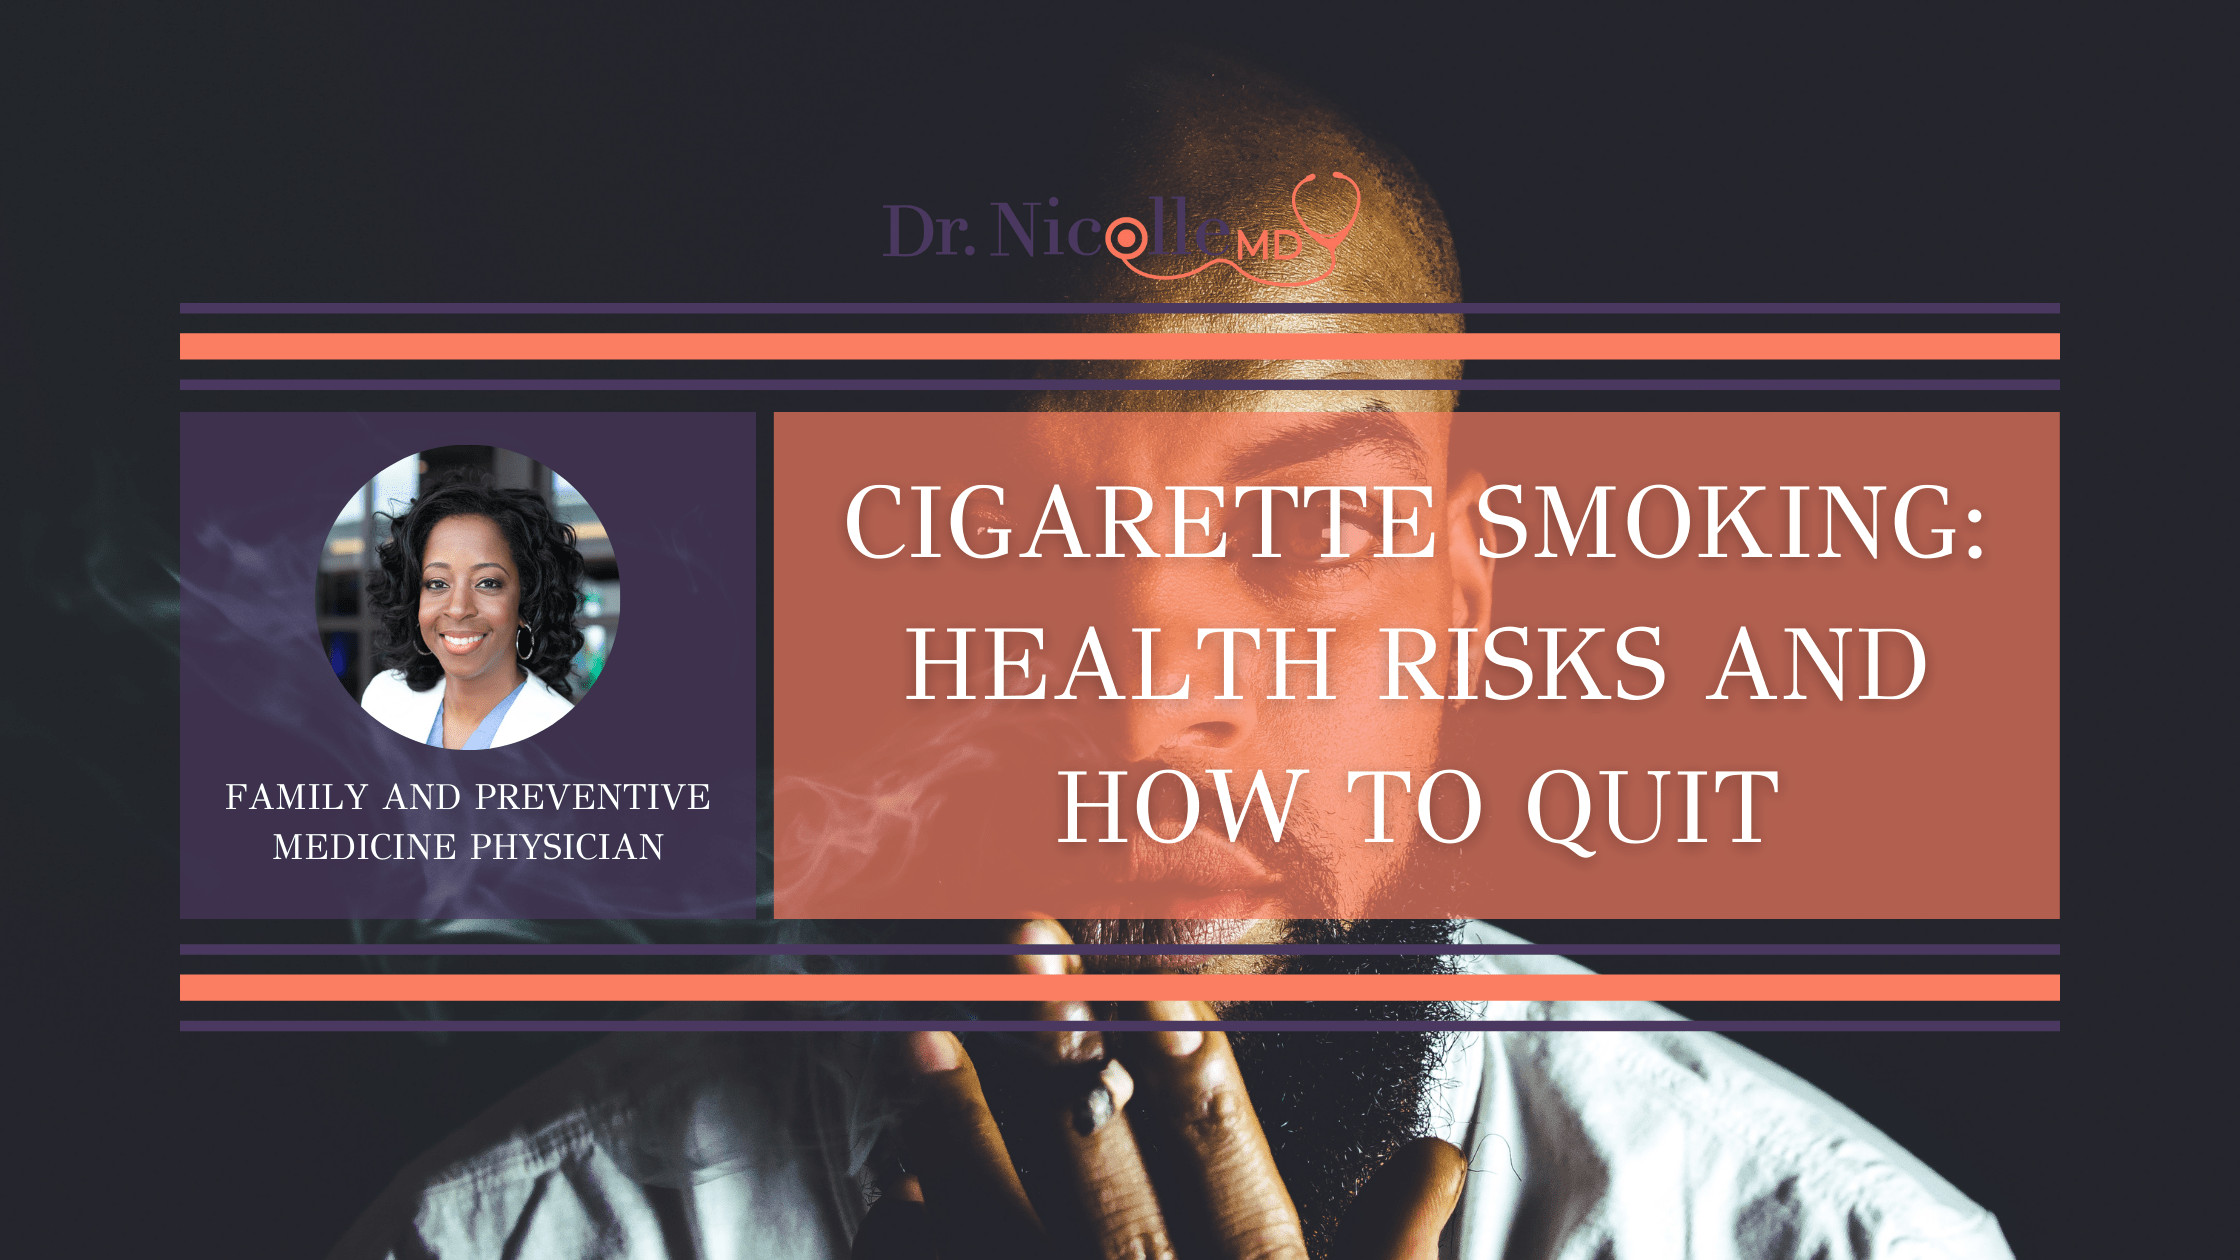 11Cigarette Smoking: Health Risks and How to Quit